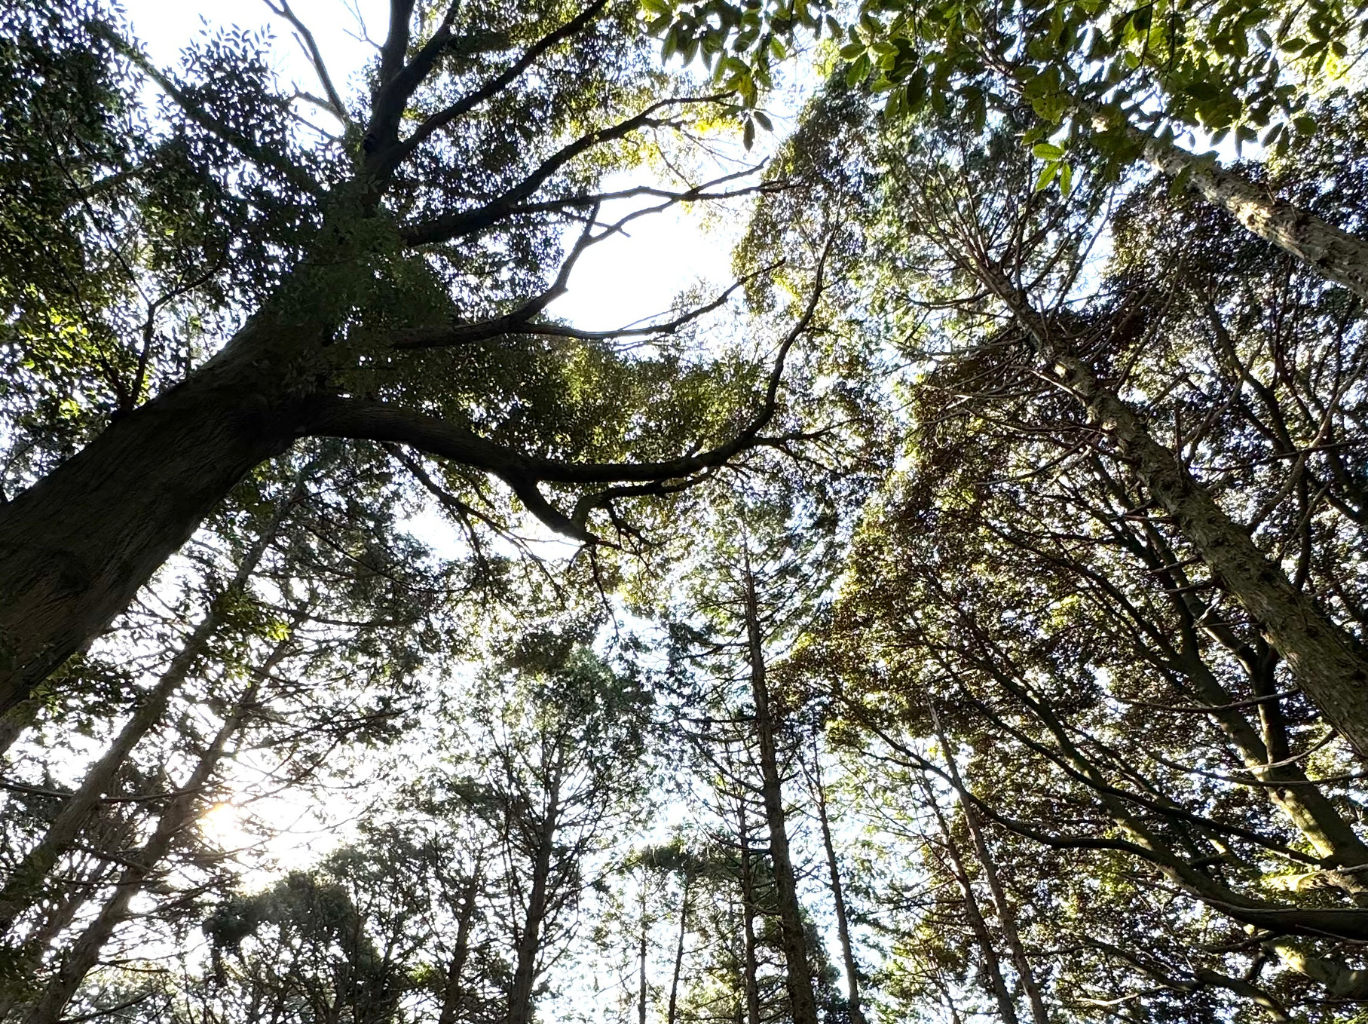 An upward image of different trees in the woods, emphasizing the importance of sustainability in entrepreneurship